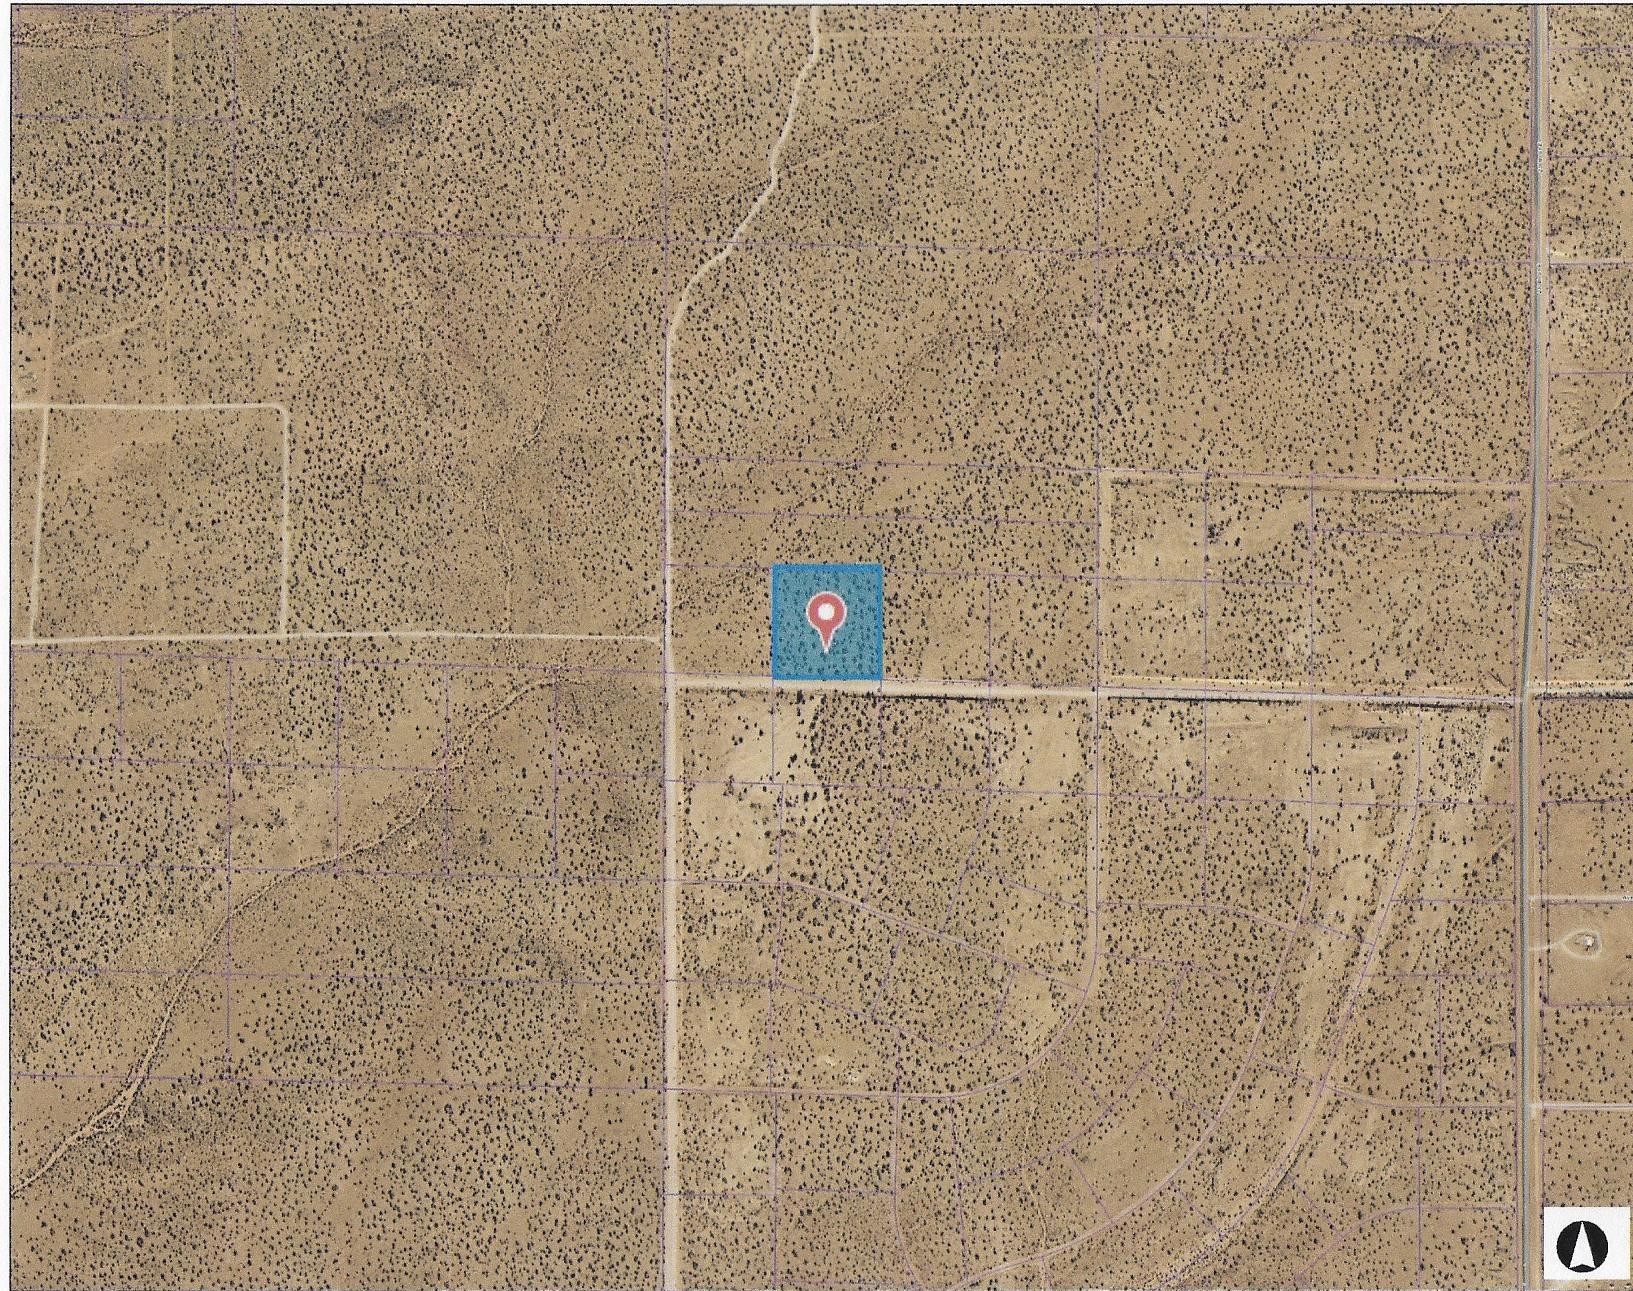 2-Acres-Palmdale-CA-Lot-28-Aerial-View